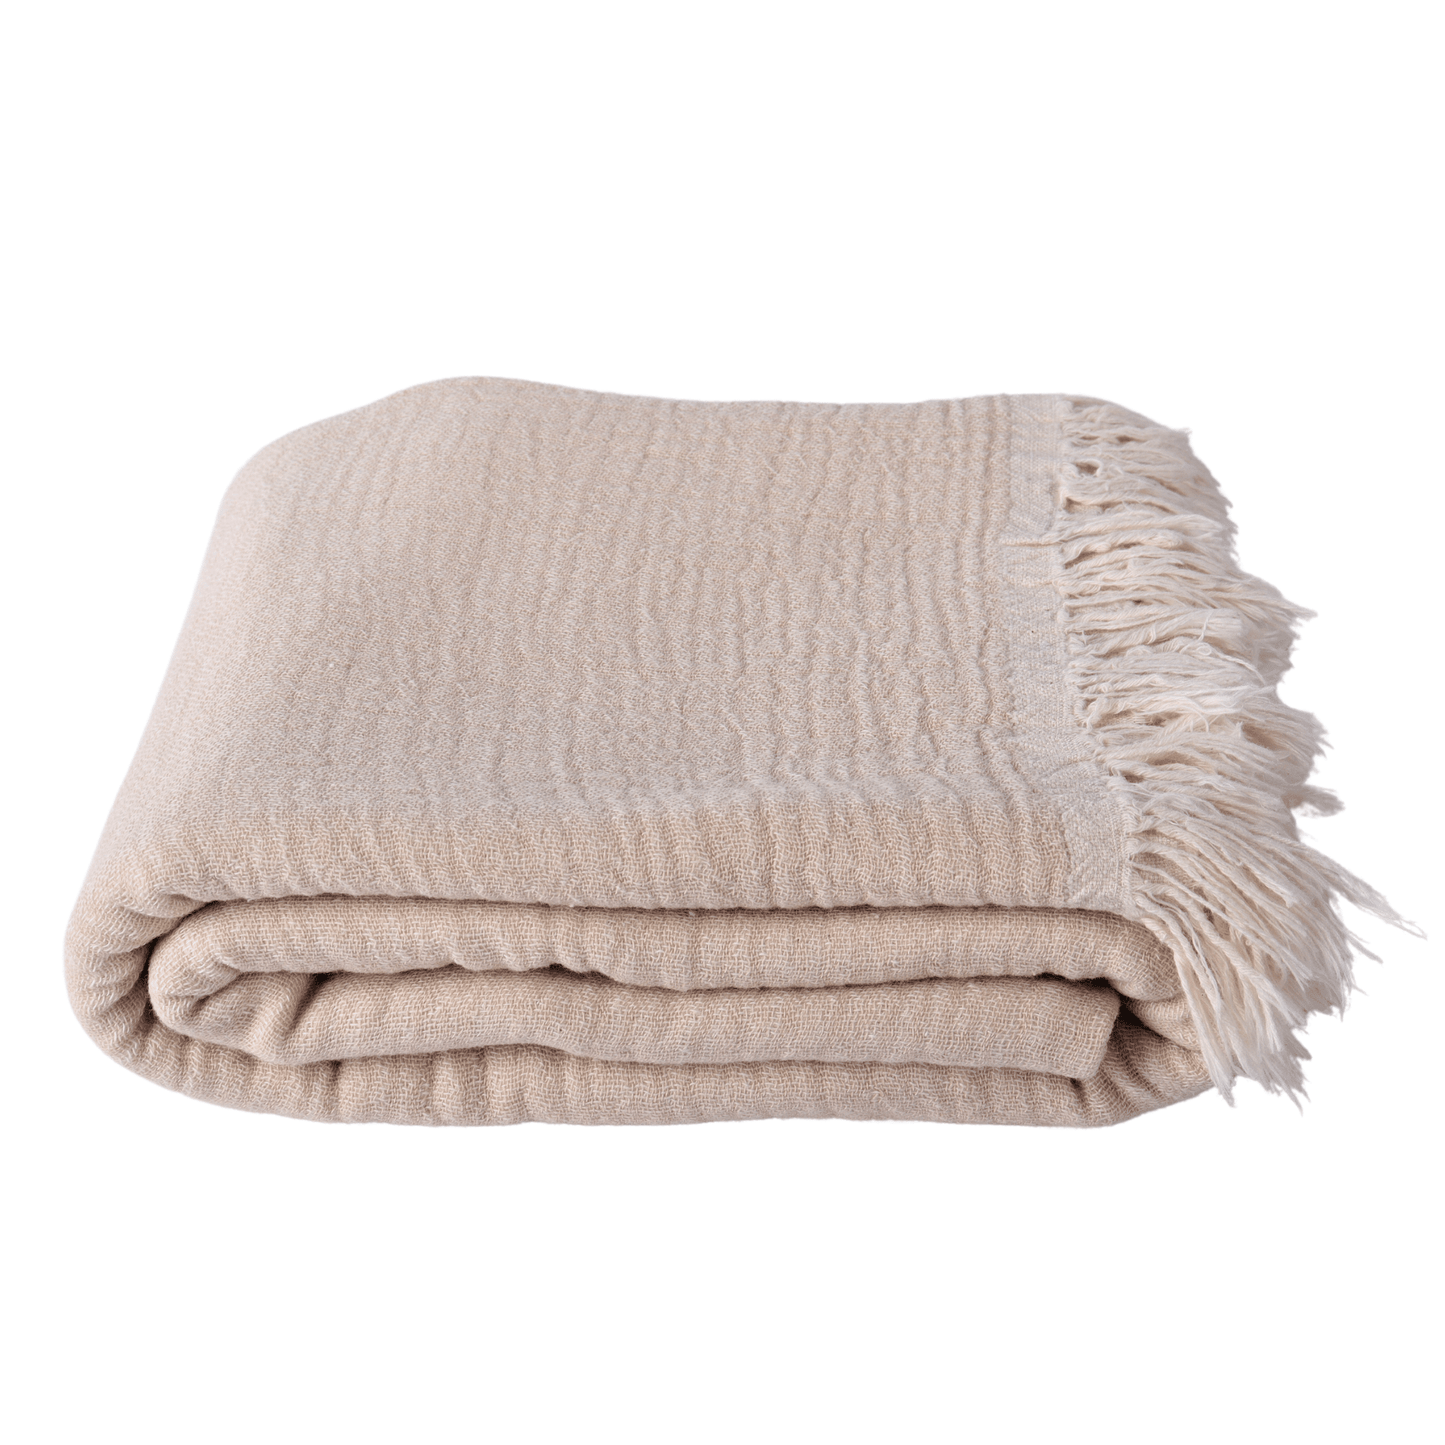 Muslin Towels for Adults natural